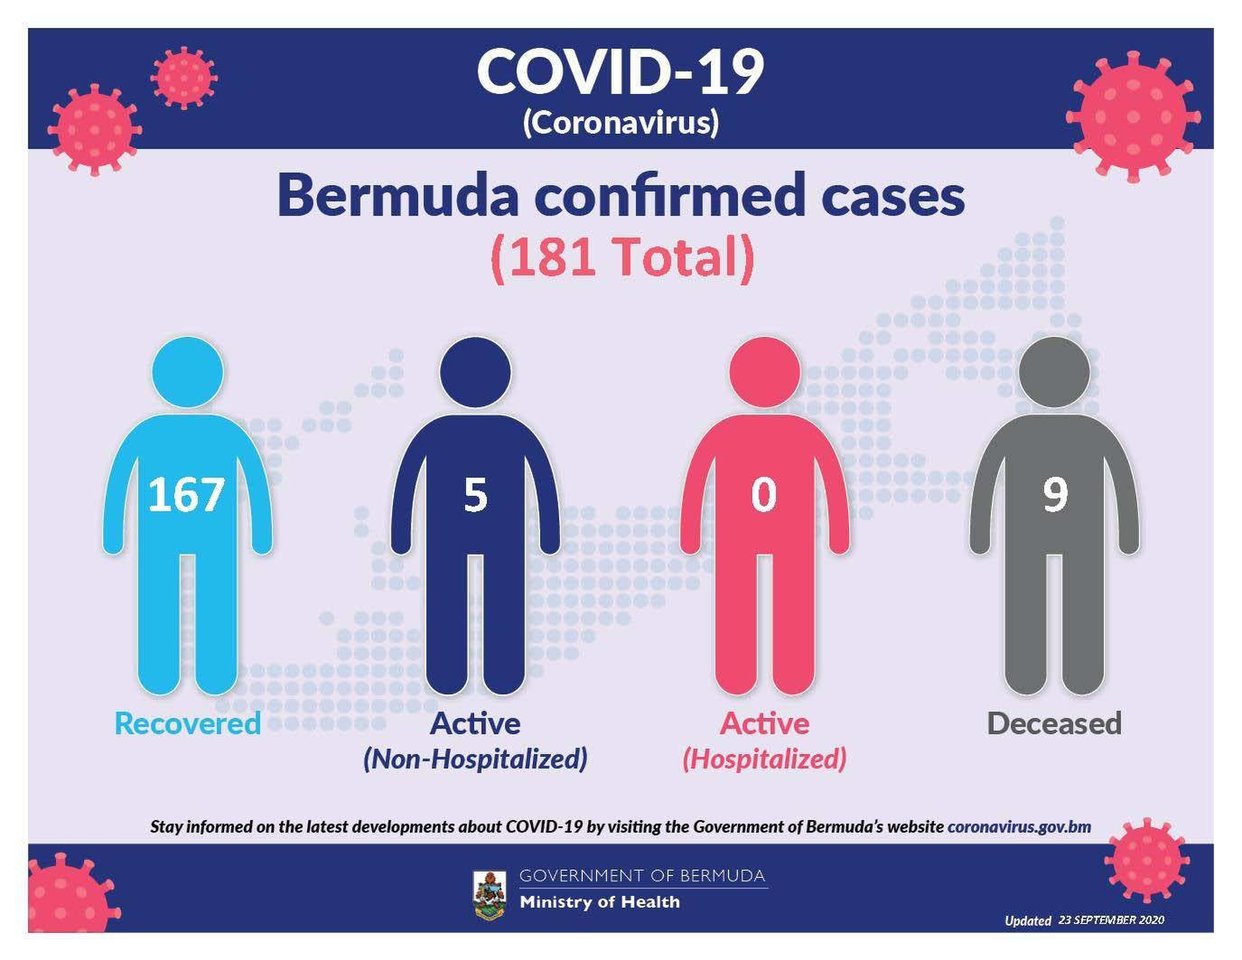 No new COVID-19 cases reported in Bermuda, 30 September